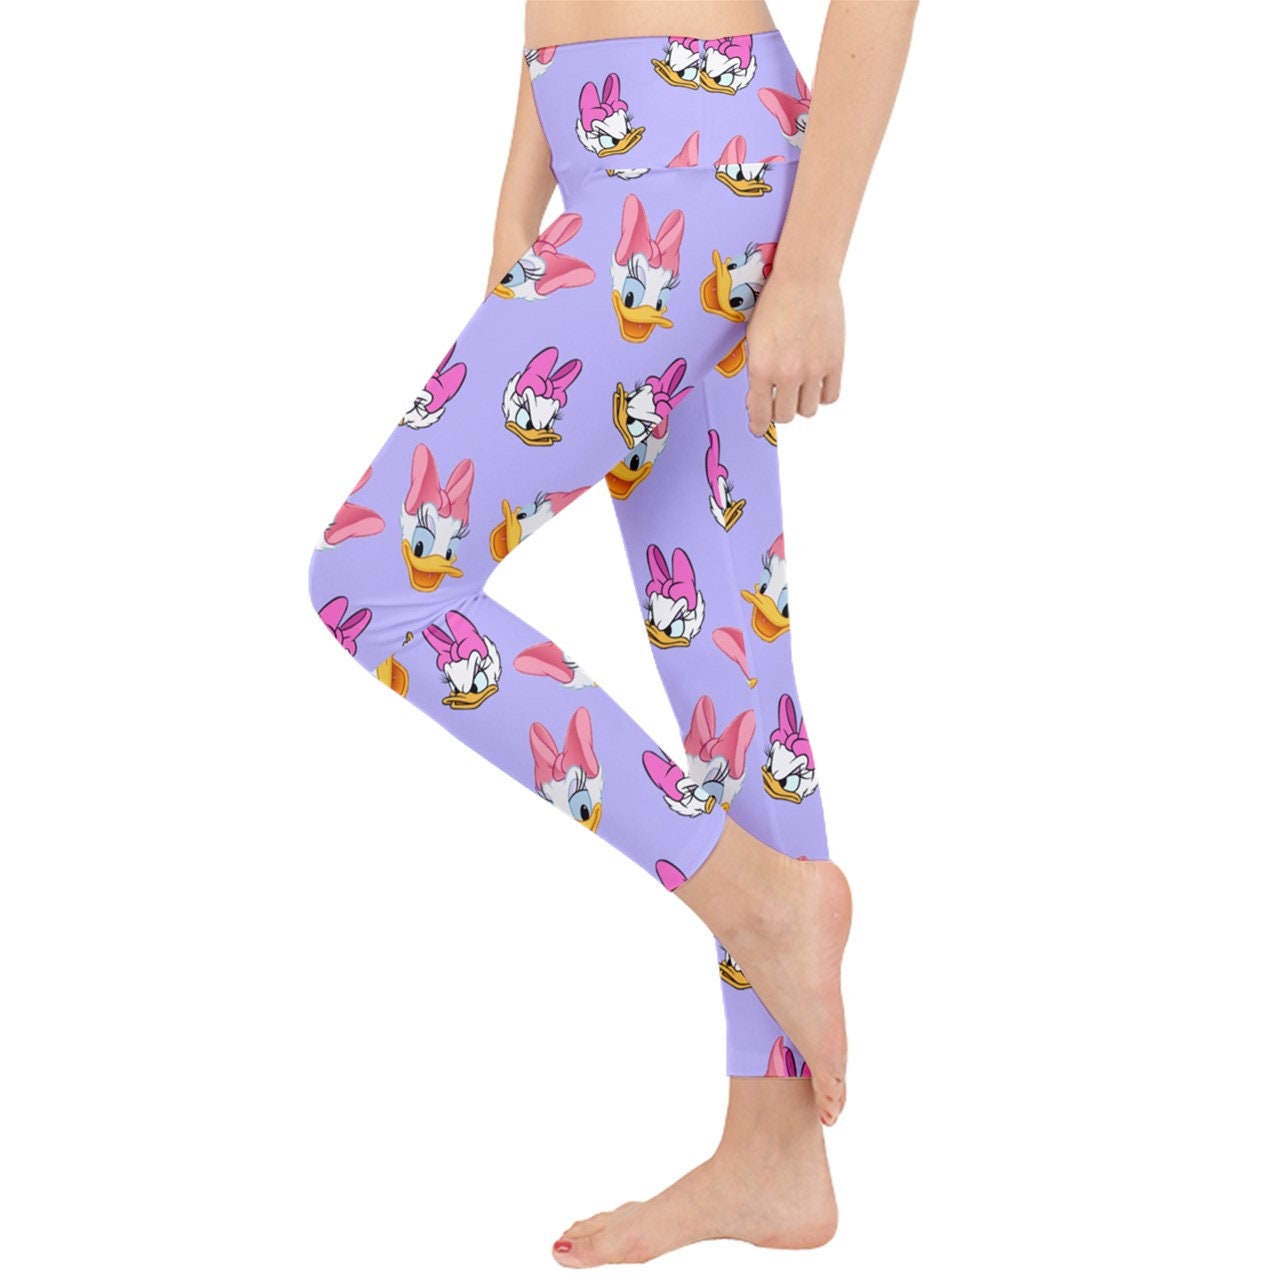 Daisies and Skulls Leggings for Women Mid Waist Pants with Daisy